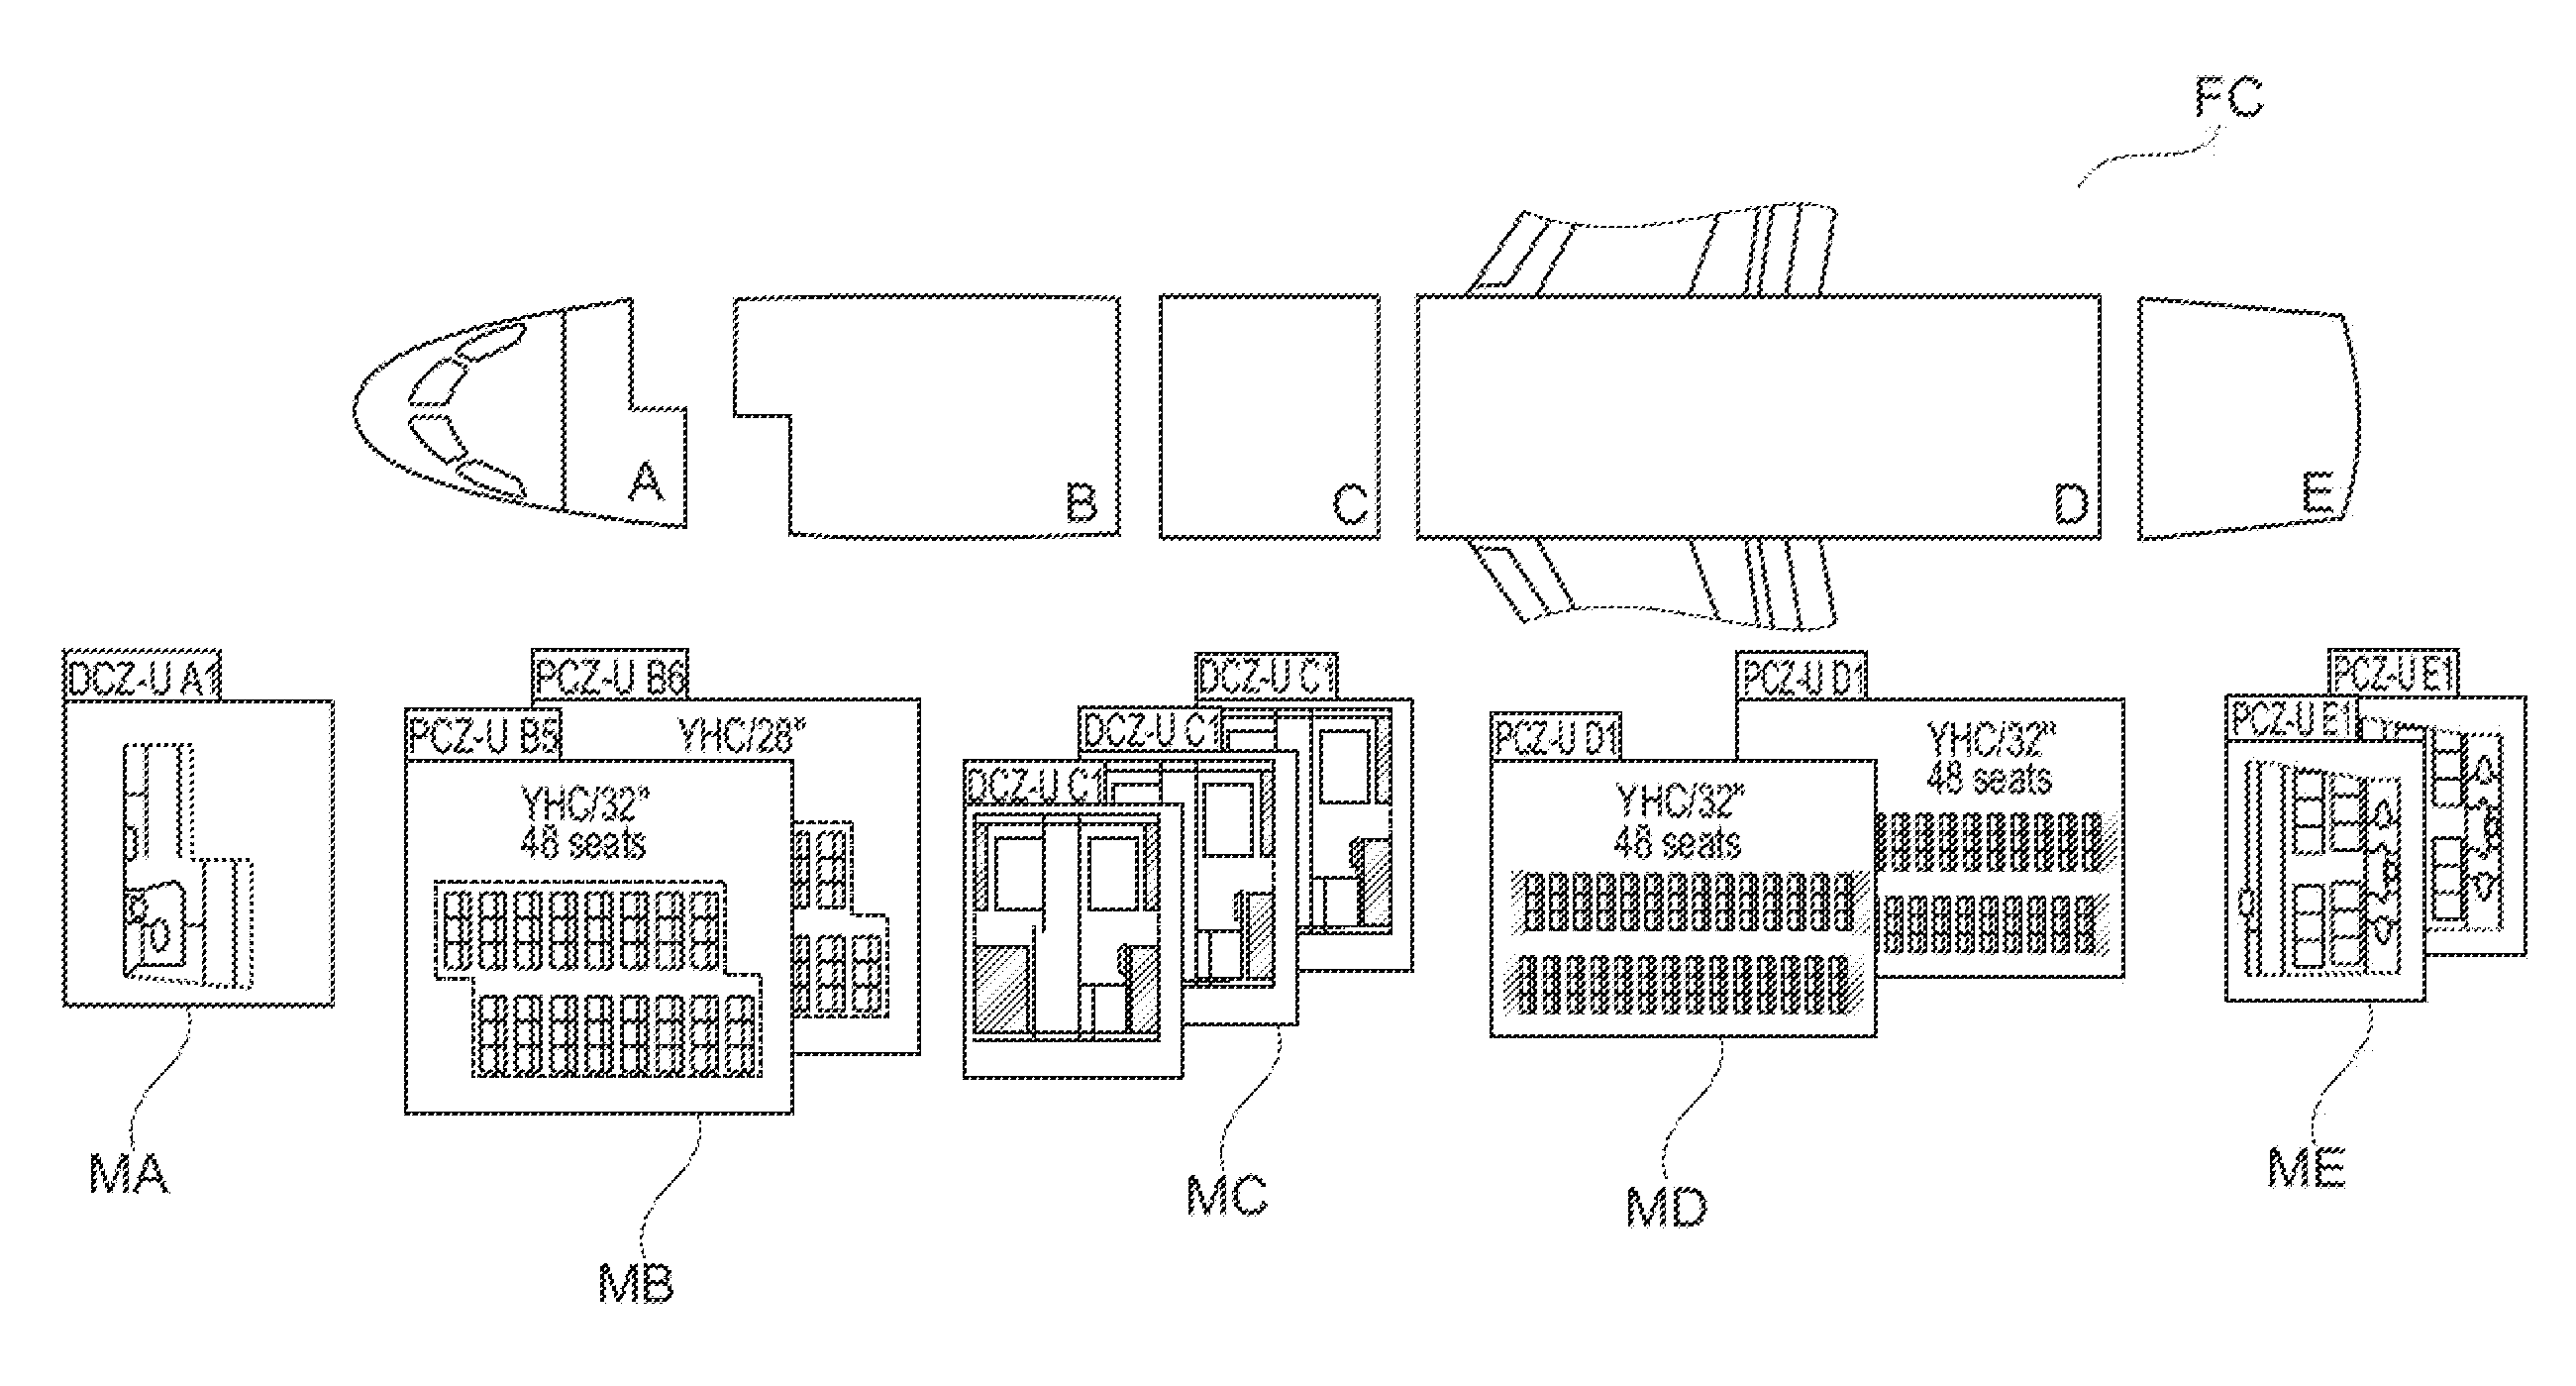 Configuration-controlled dynamic generation of product data for complex products